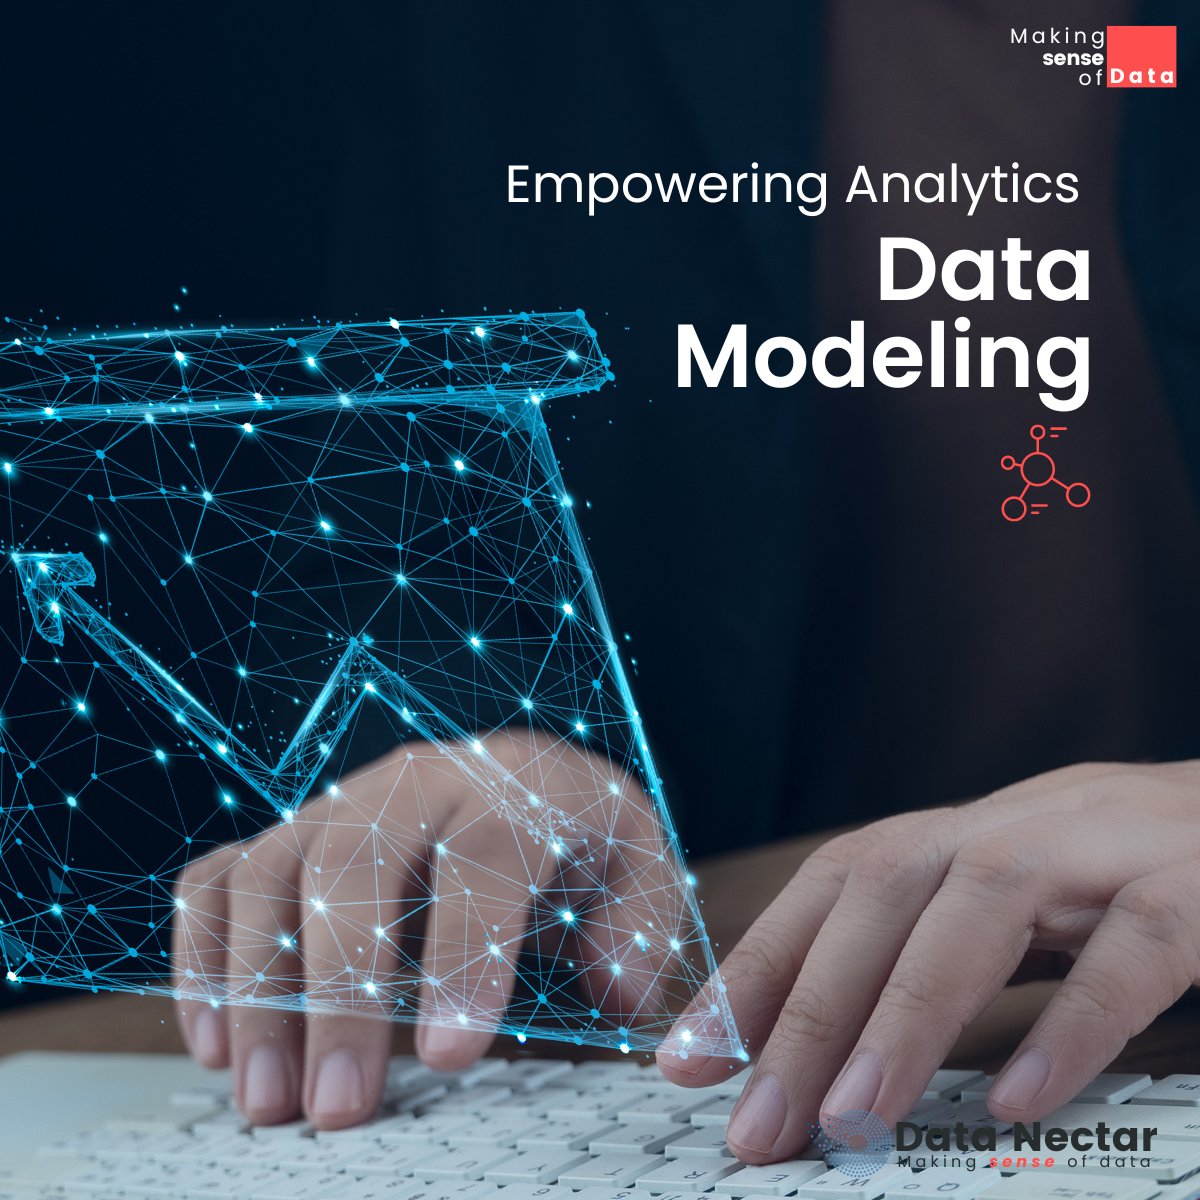 #DataModeling: Empowering Analytics for Informed Decision-Making 📊In the world of data, every connection matters. Let's explore the art of data modeling together! 🔗
#DataArchitecture #dataanalytics #analyticsstrategy #dataservices #powerbi #bitools #AIandAnalytics